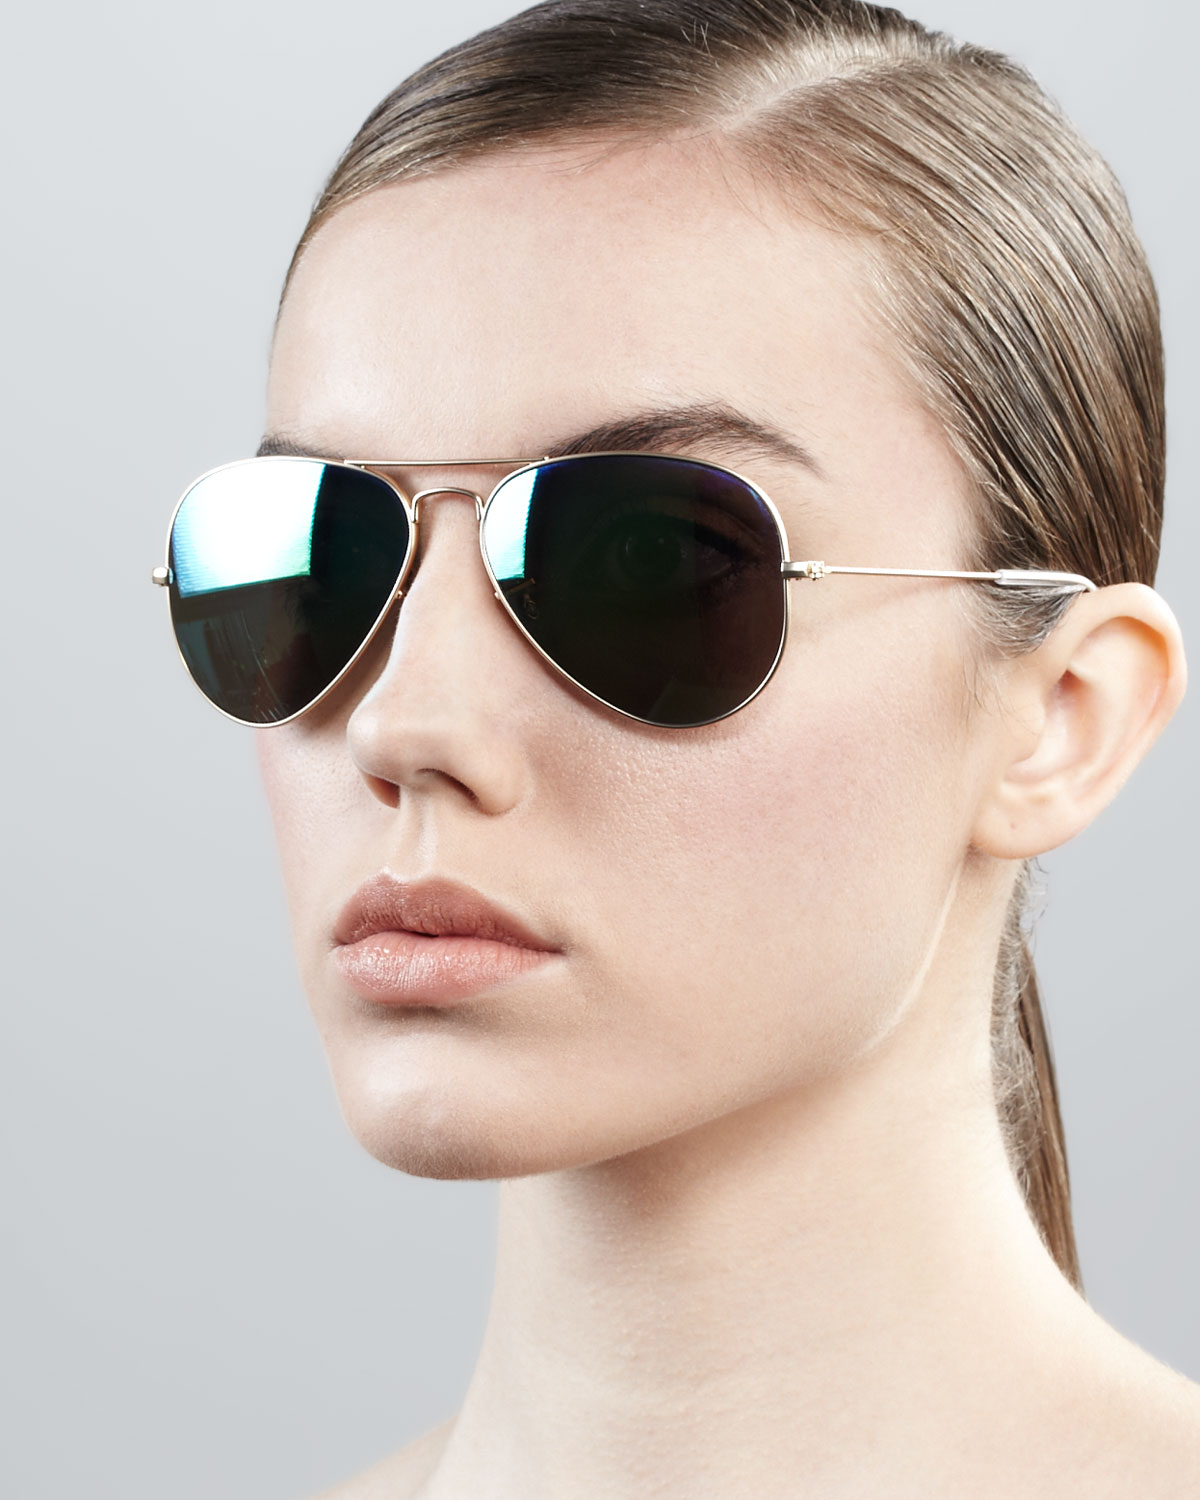 Lyst - Ray-Ban Aviator Sunglasses With Flash Lenses in Black